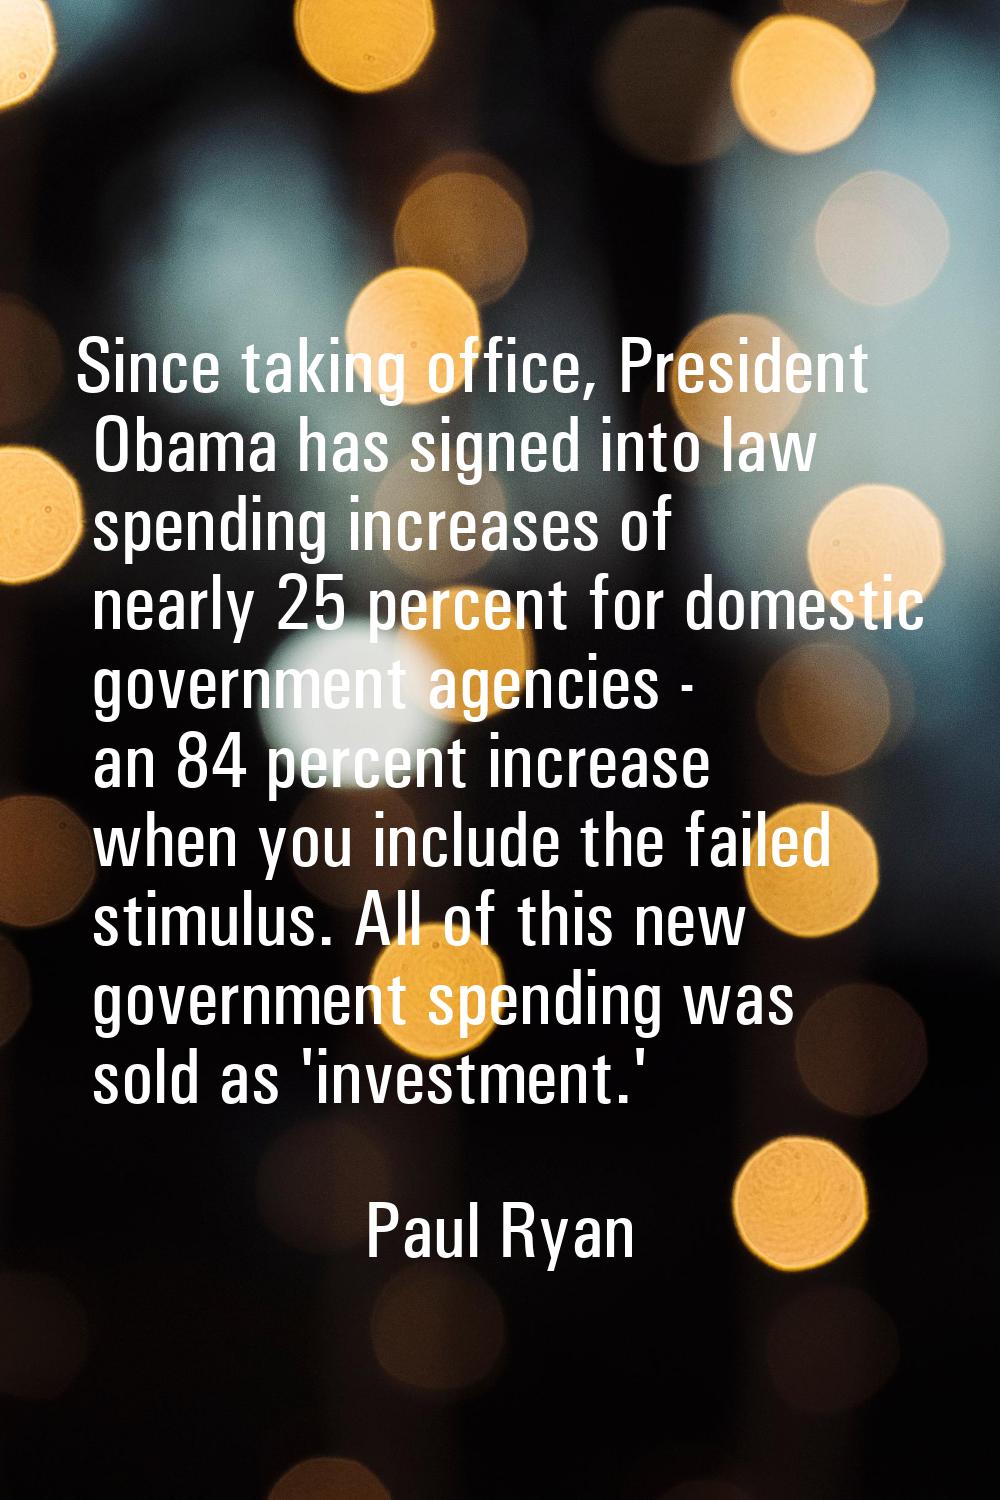 Since taking office, President Obama has signed into law spending increases of nearly 25 percent fo